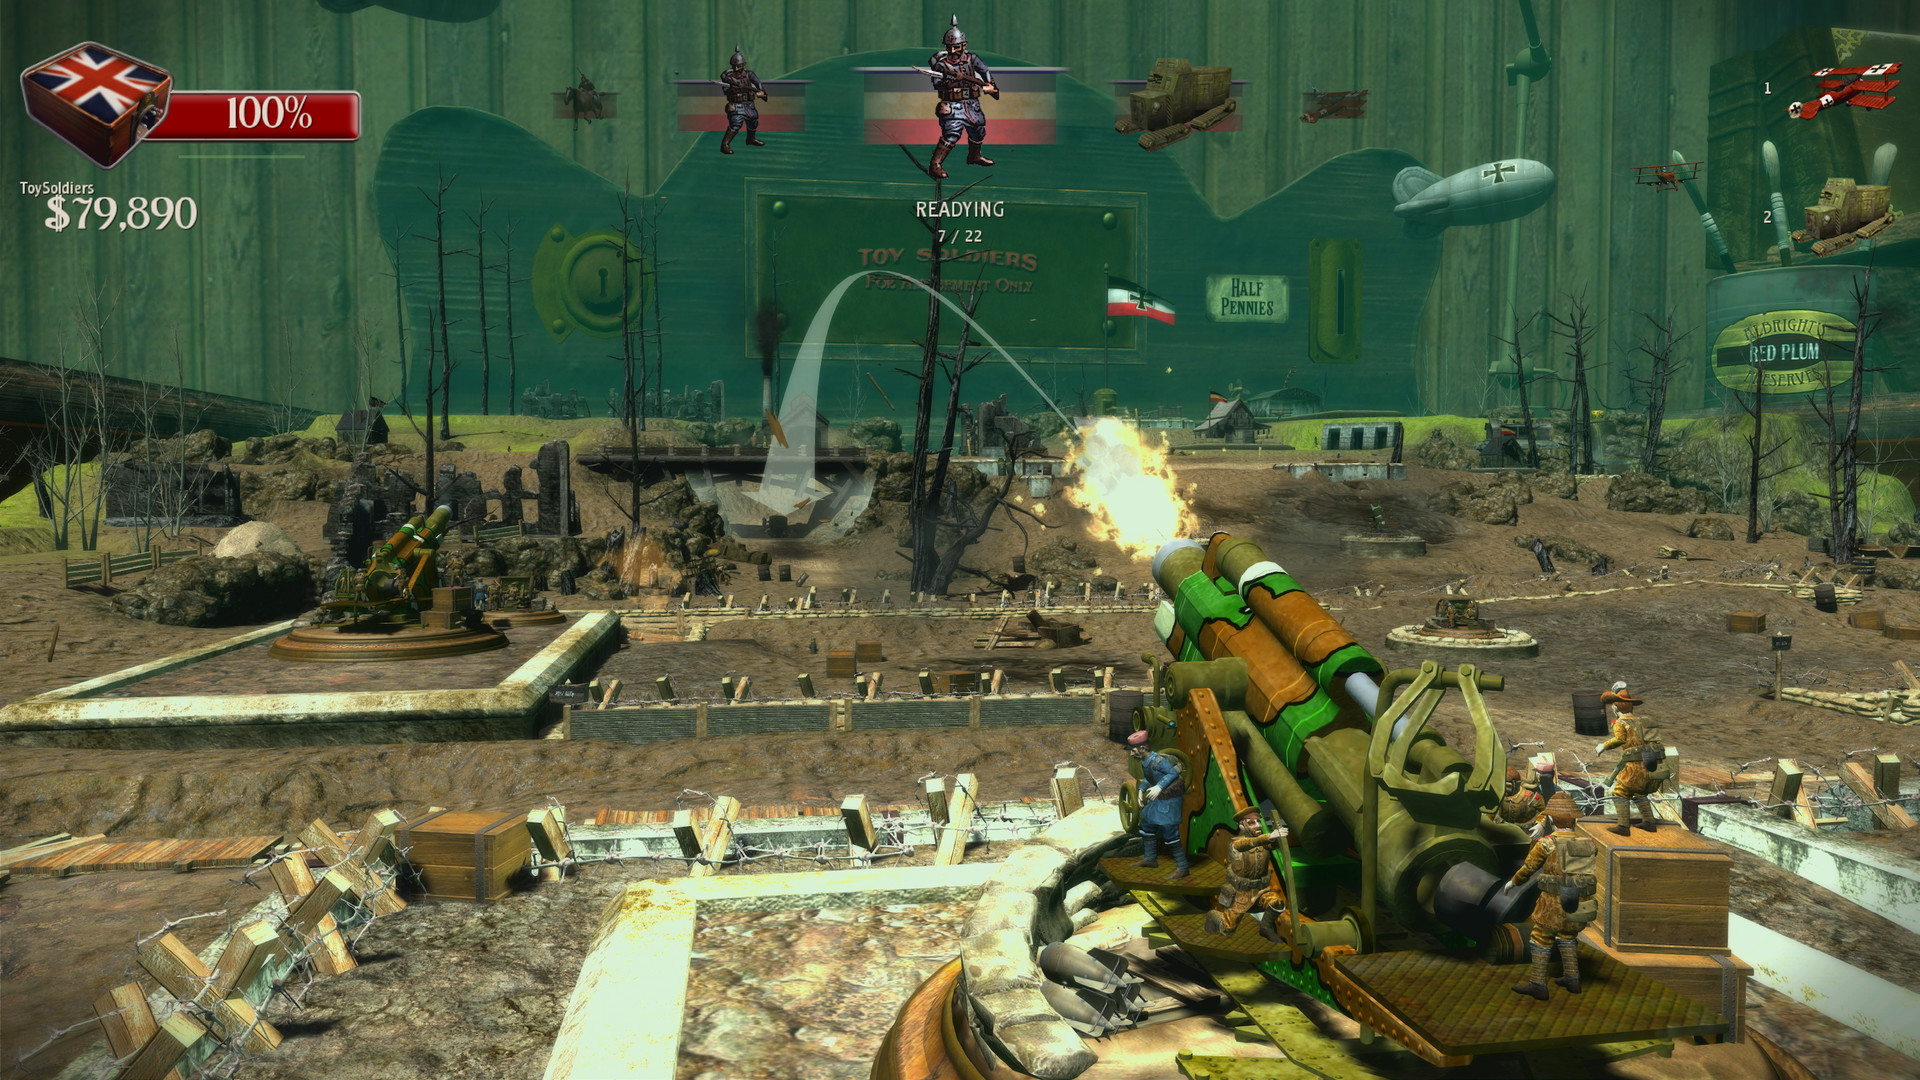 Toy Soldiers: HD Steam CD Key